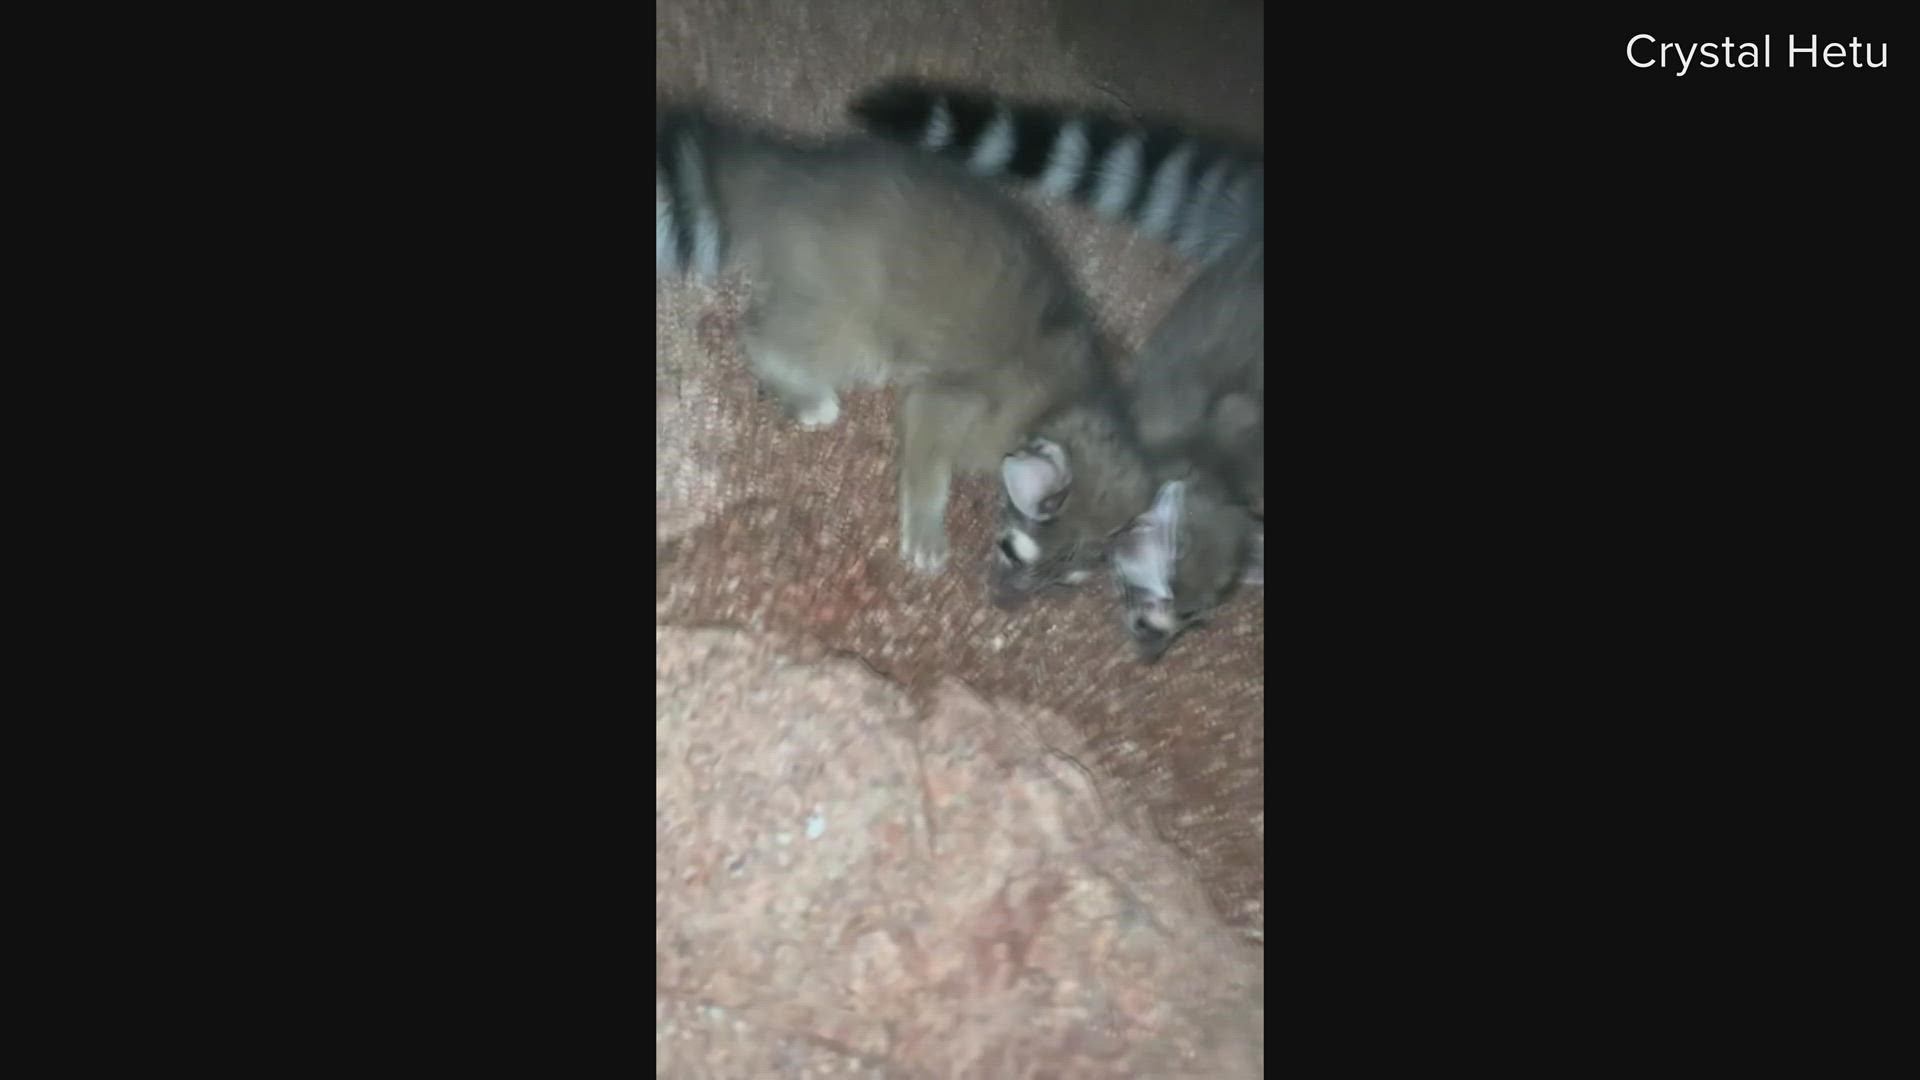 Crystal Hetu was able to film these three ringtails up close and personal Saturday morning.